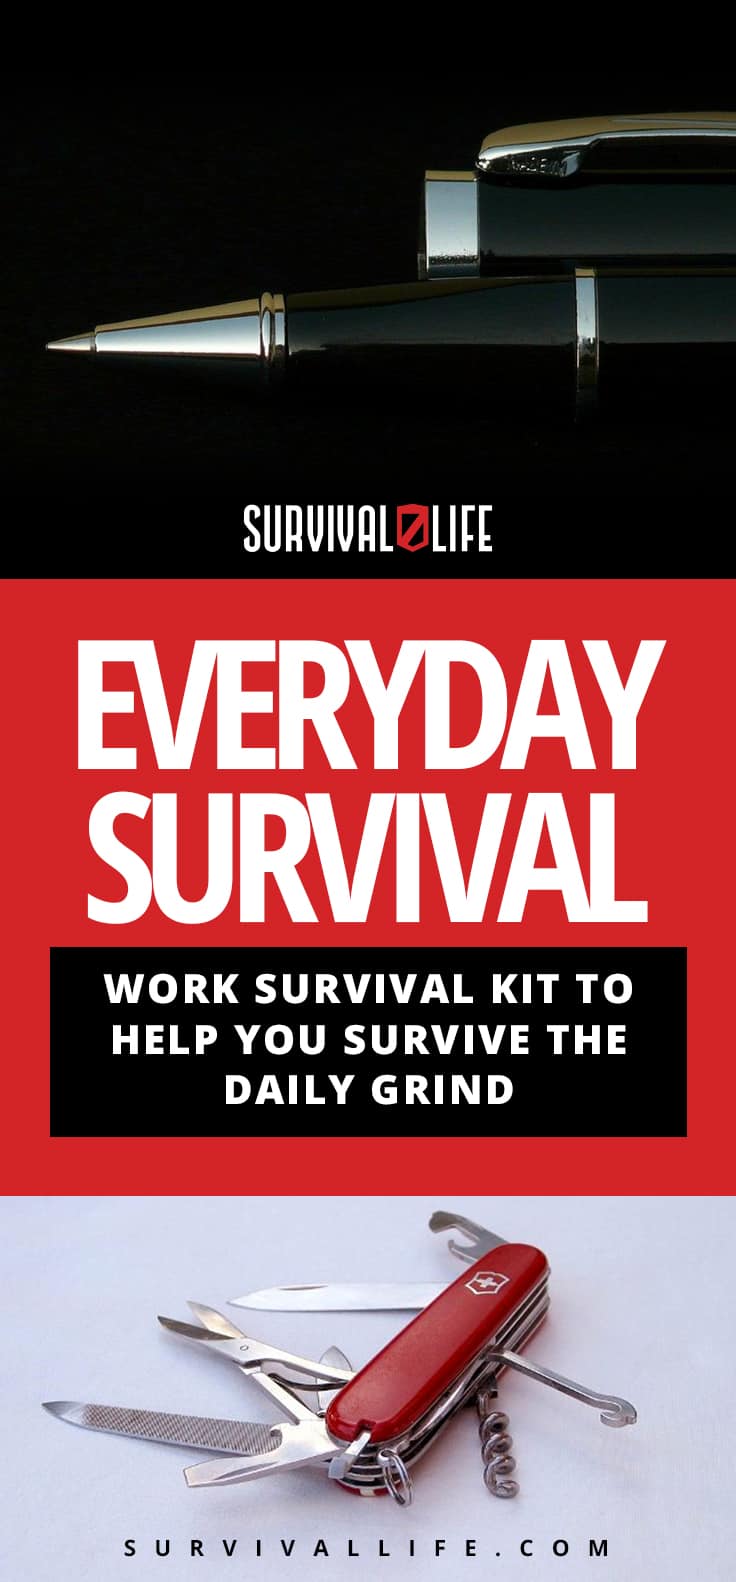 Everyday Survival: Work Survival Kit To Help You Survive The Daily Grind